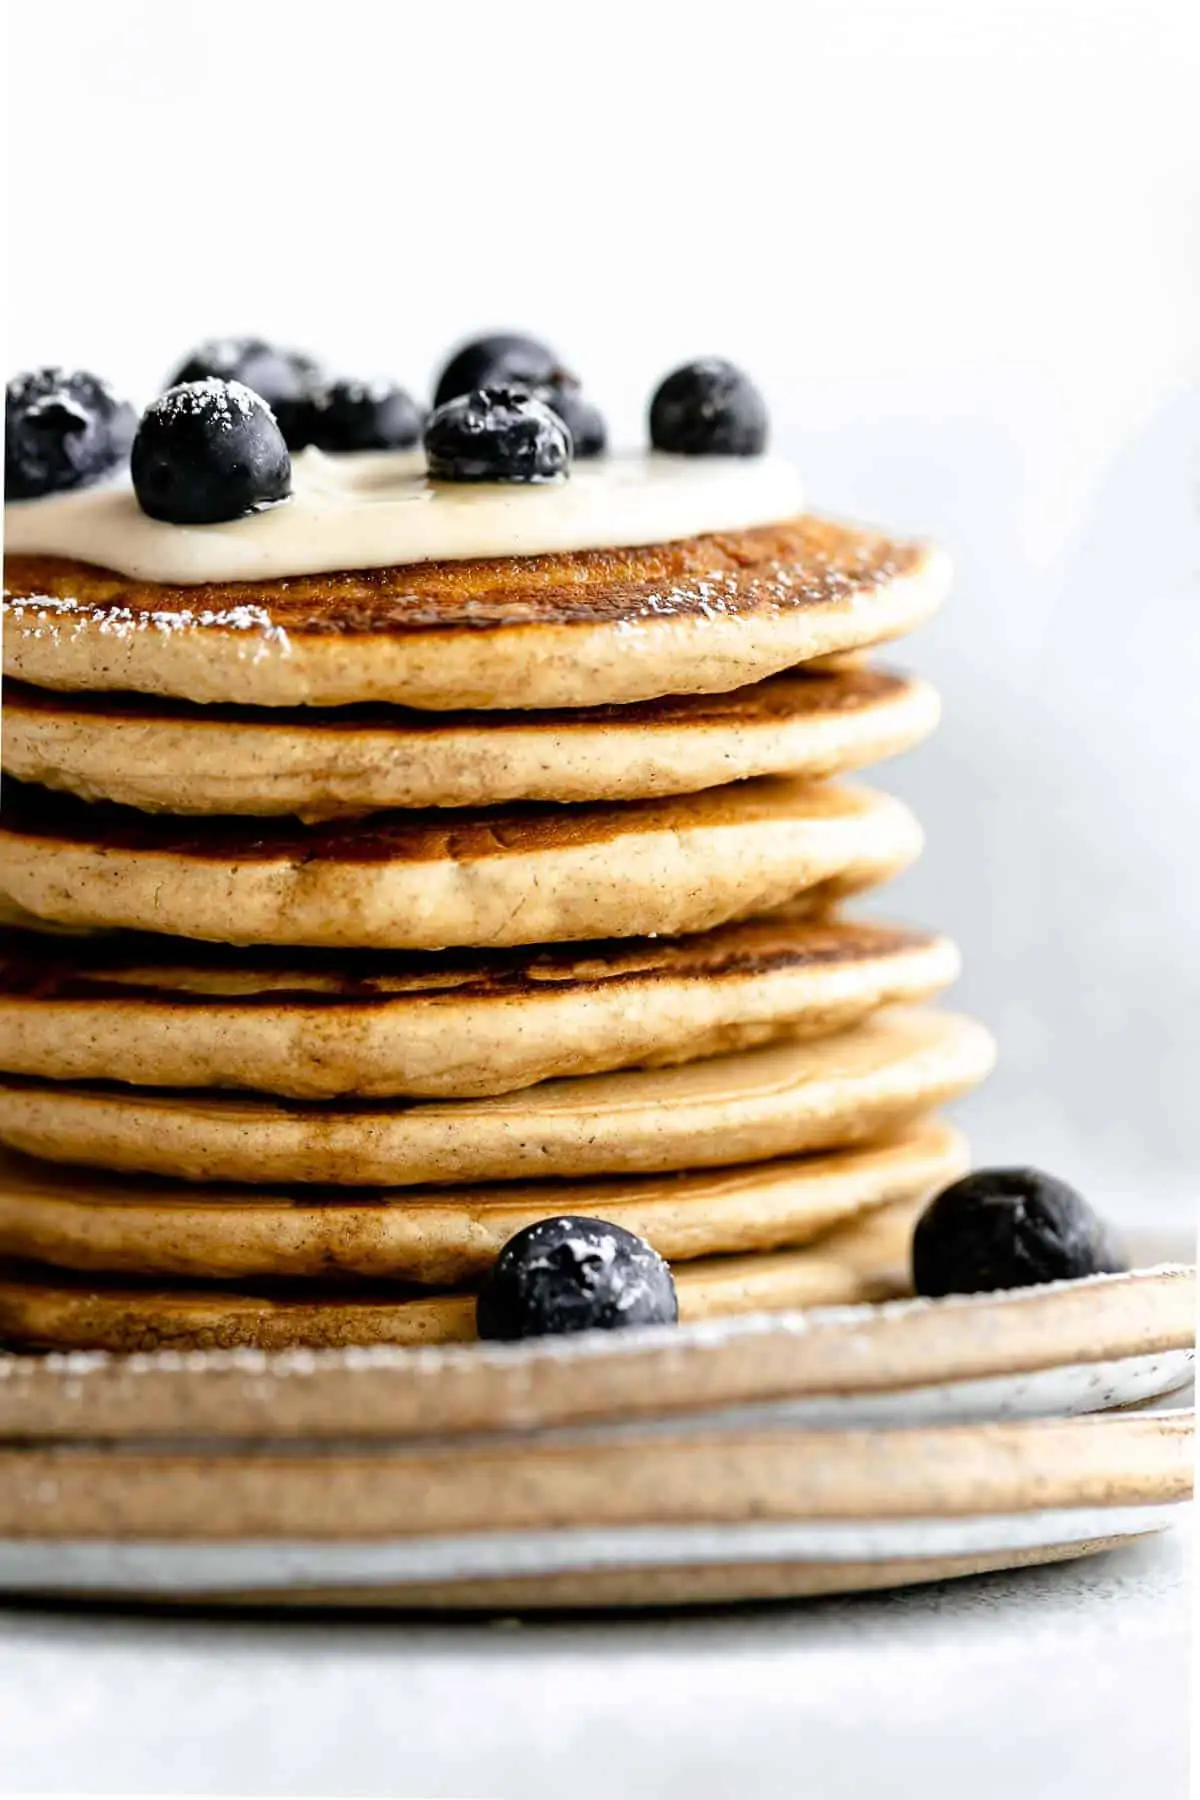 up close of gluten free oat flour pancakes with berries